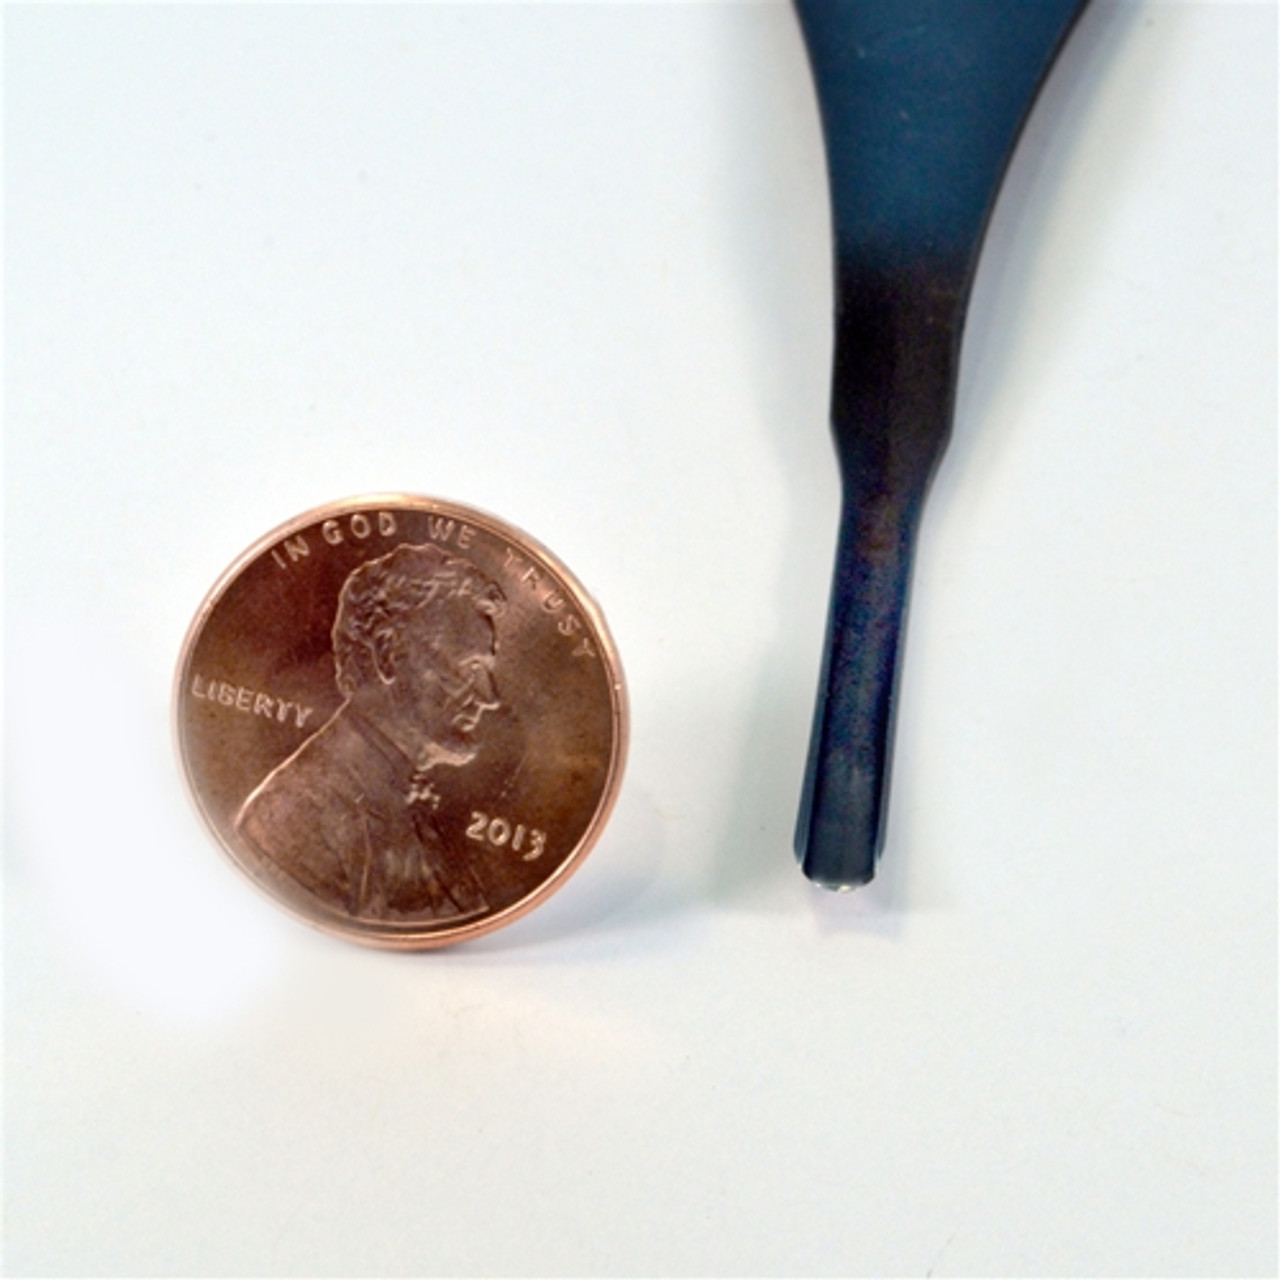 Flexcut FR601 Palm Carving  #5 x 1/8" Gouge next to a penny to compare the tip of the gouge.